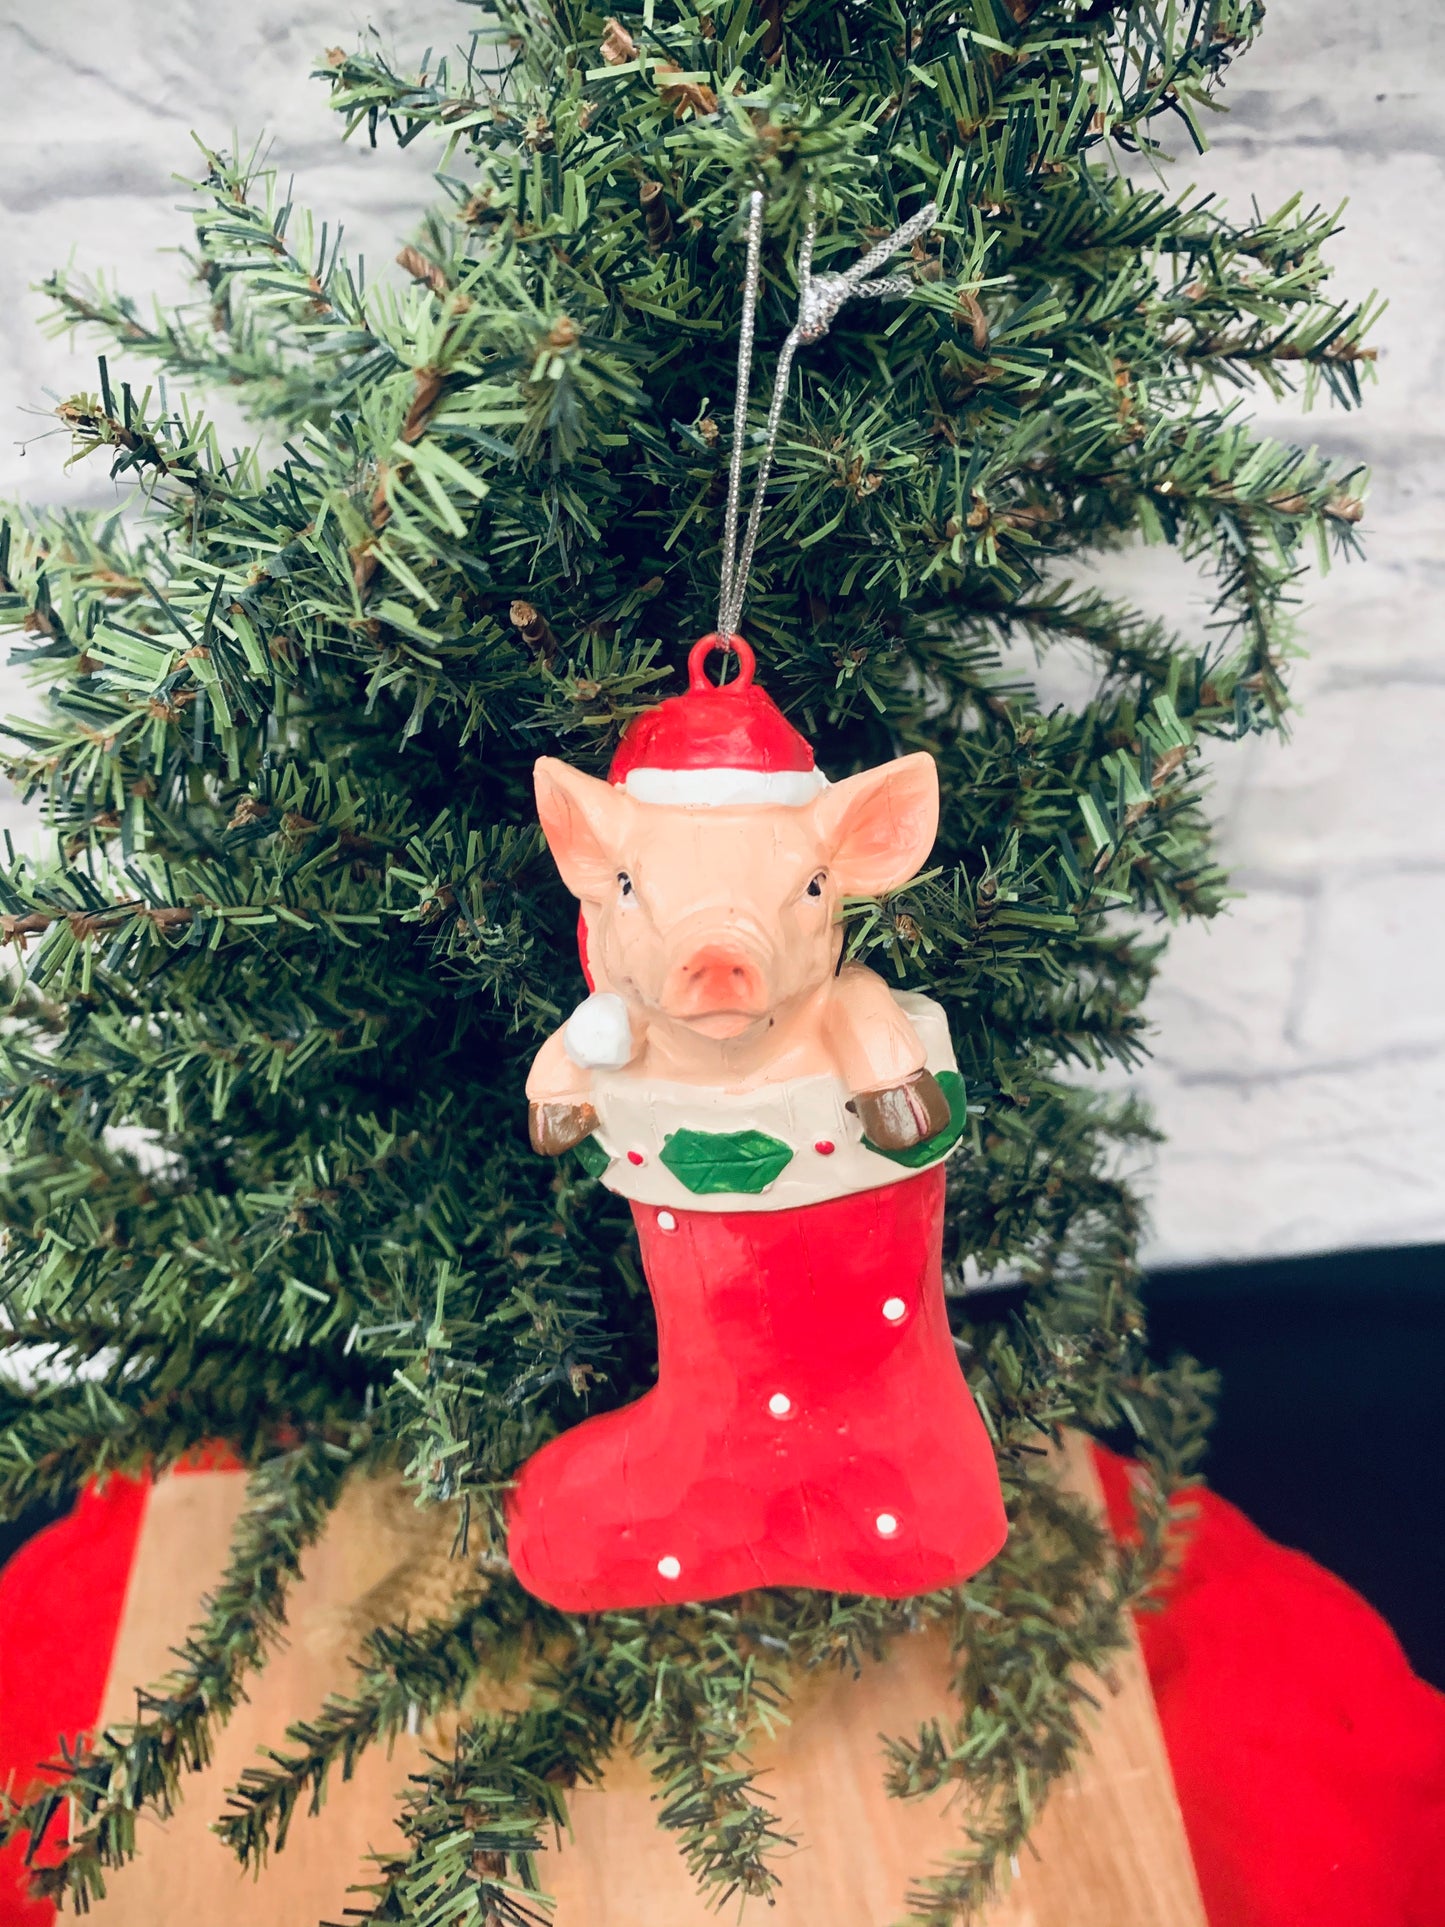 Pig in Stocking Ornament